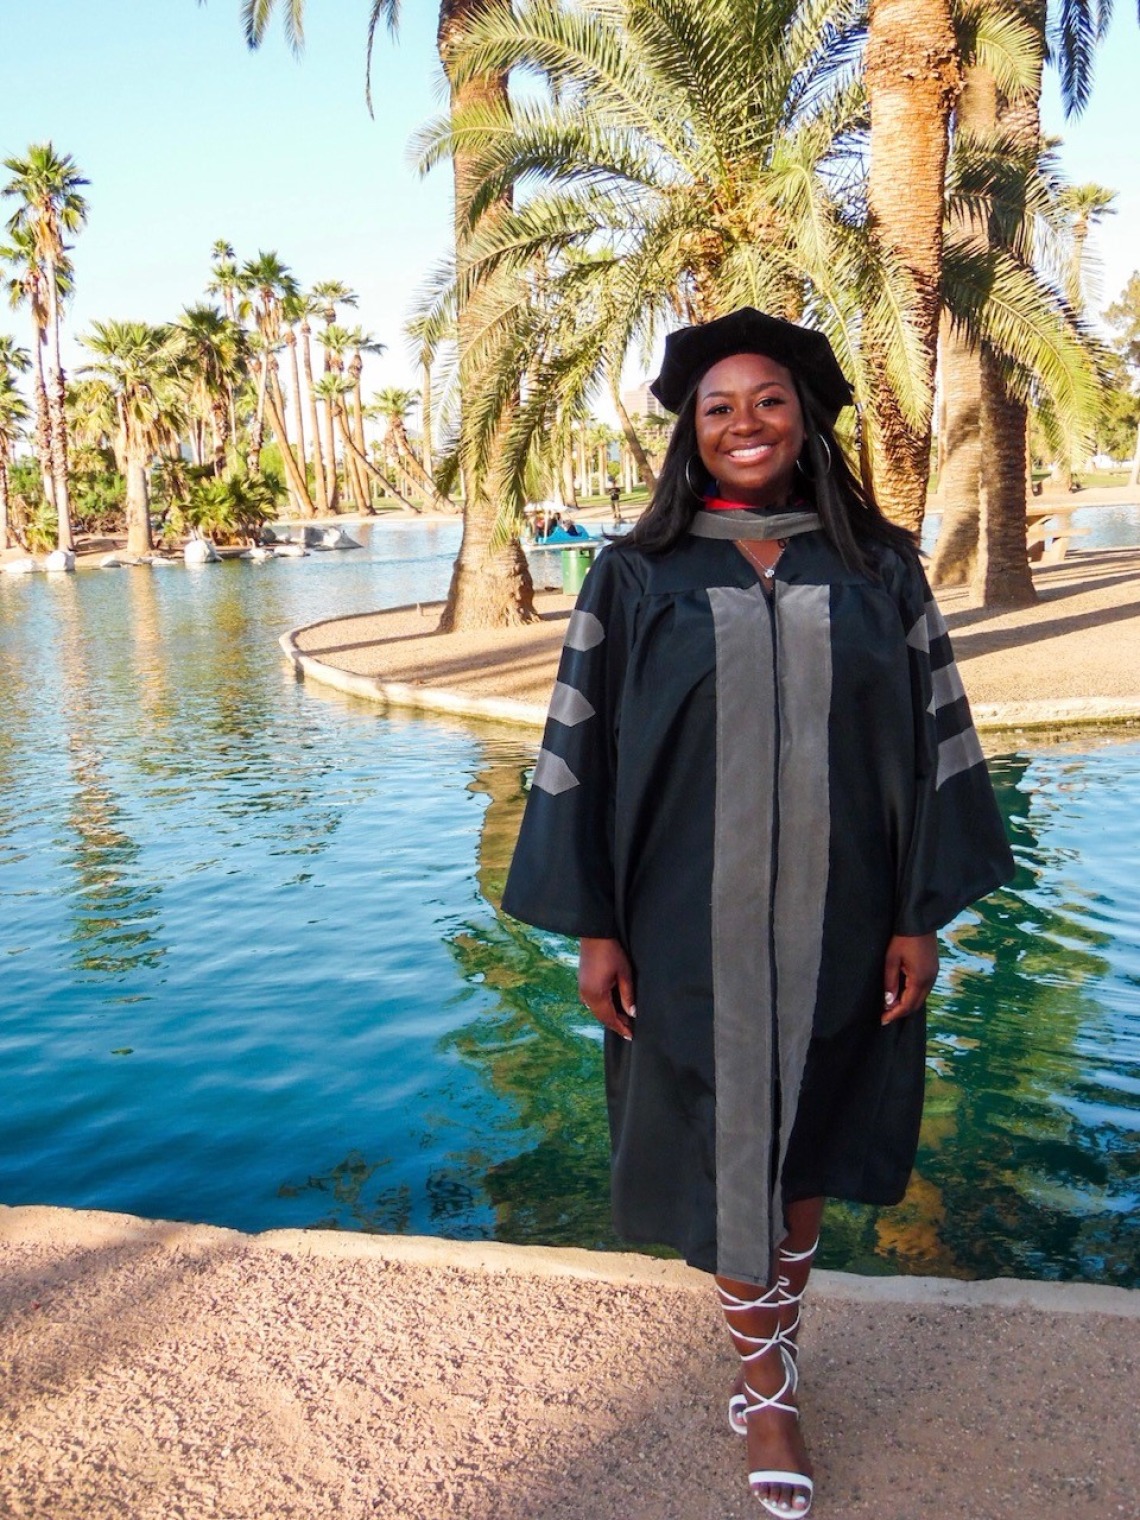 Ari Adams stands in graduation regalia in front of a water feature and palm trees.